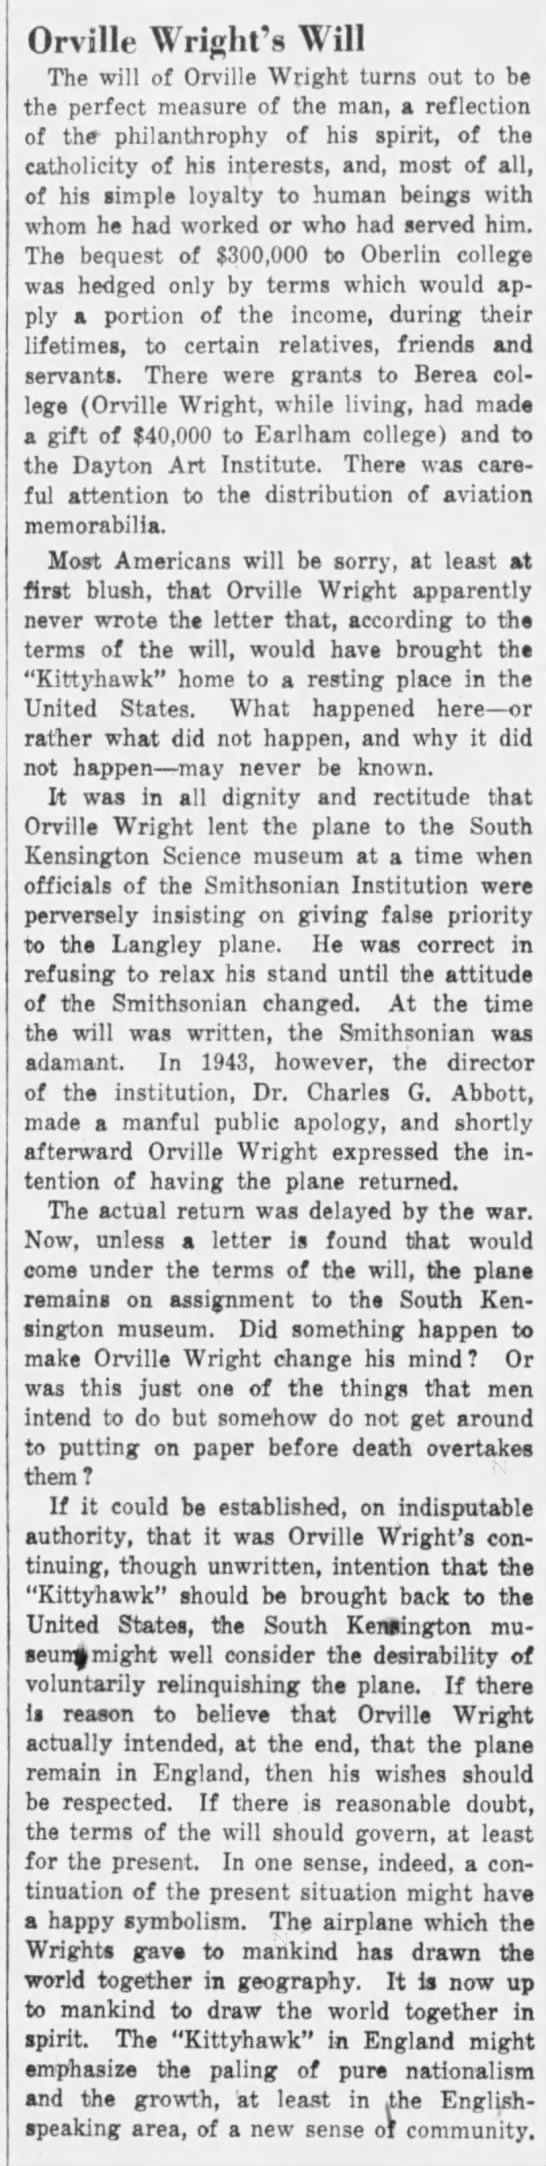 Terms of Orville Wright's will - 